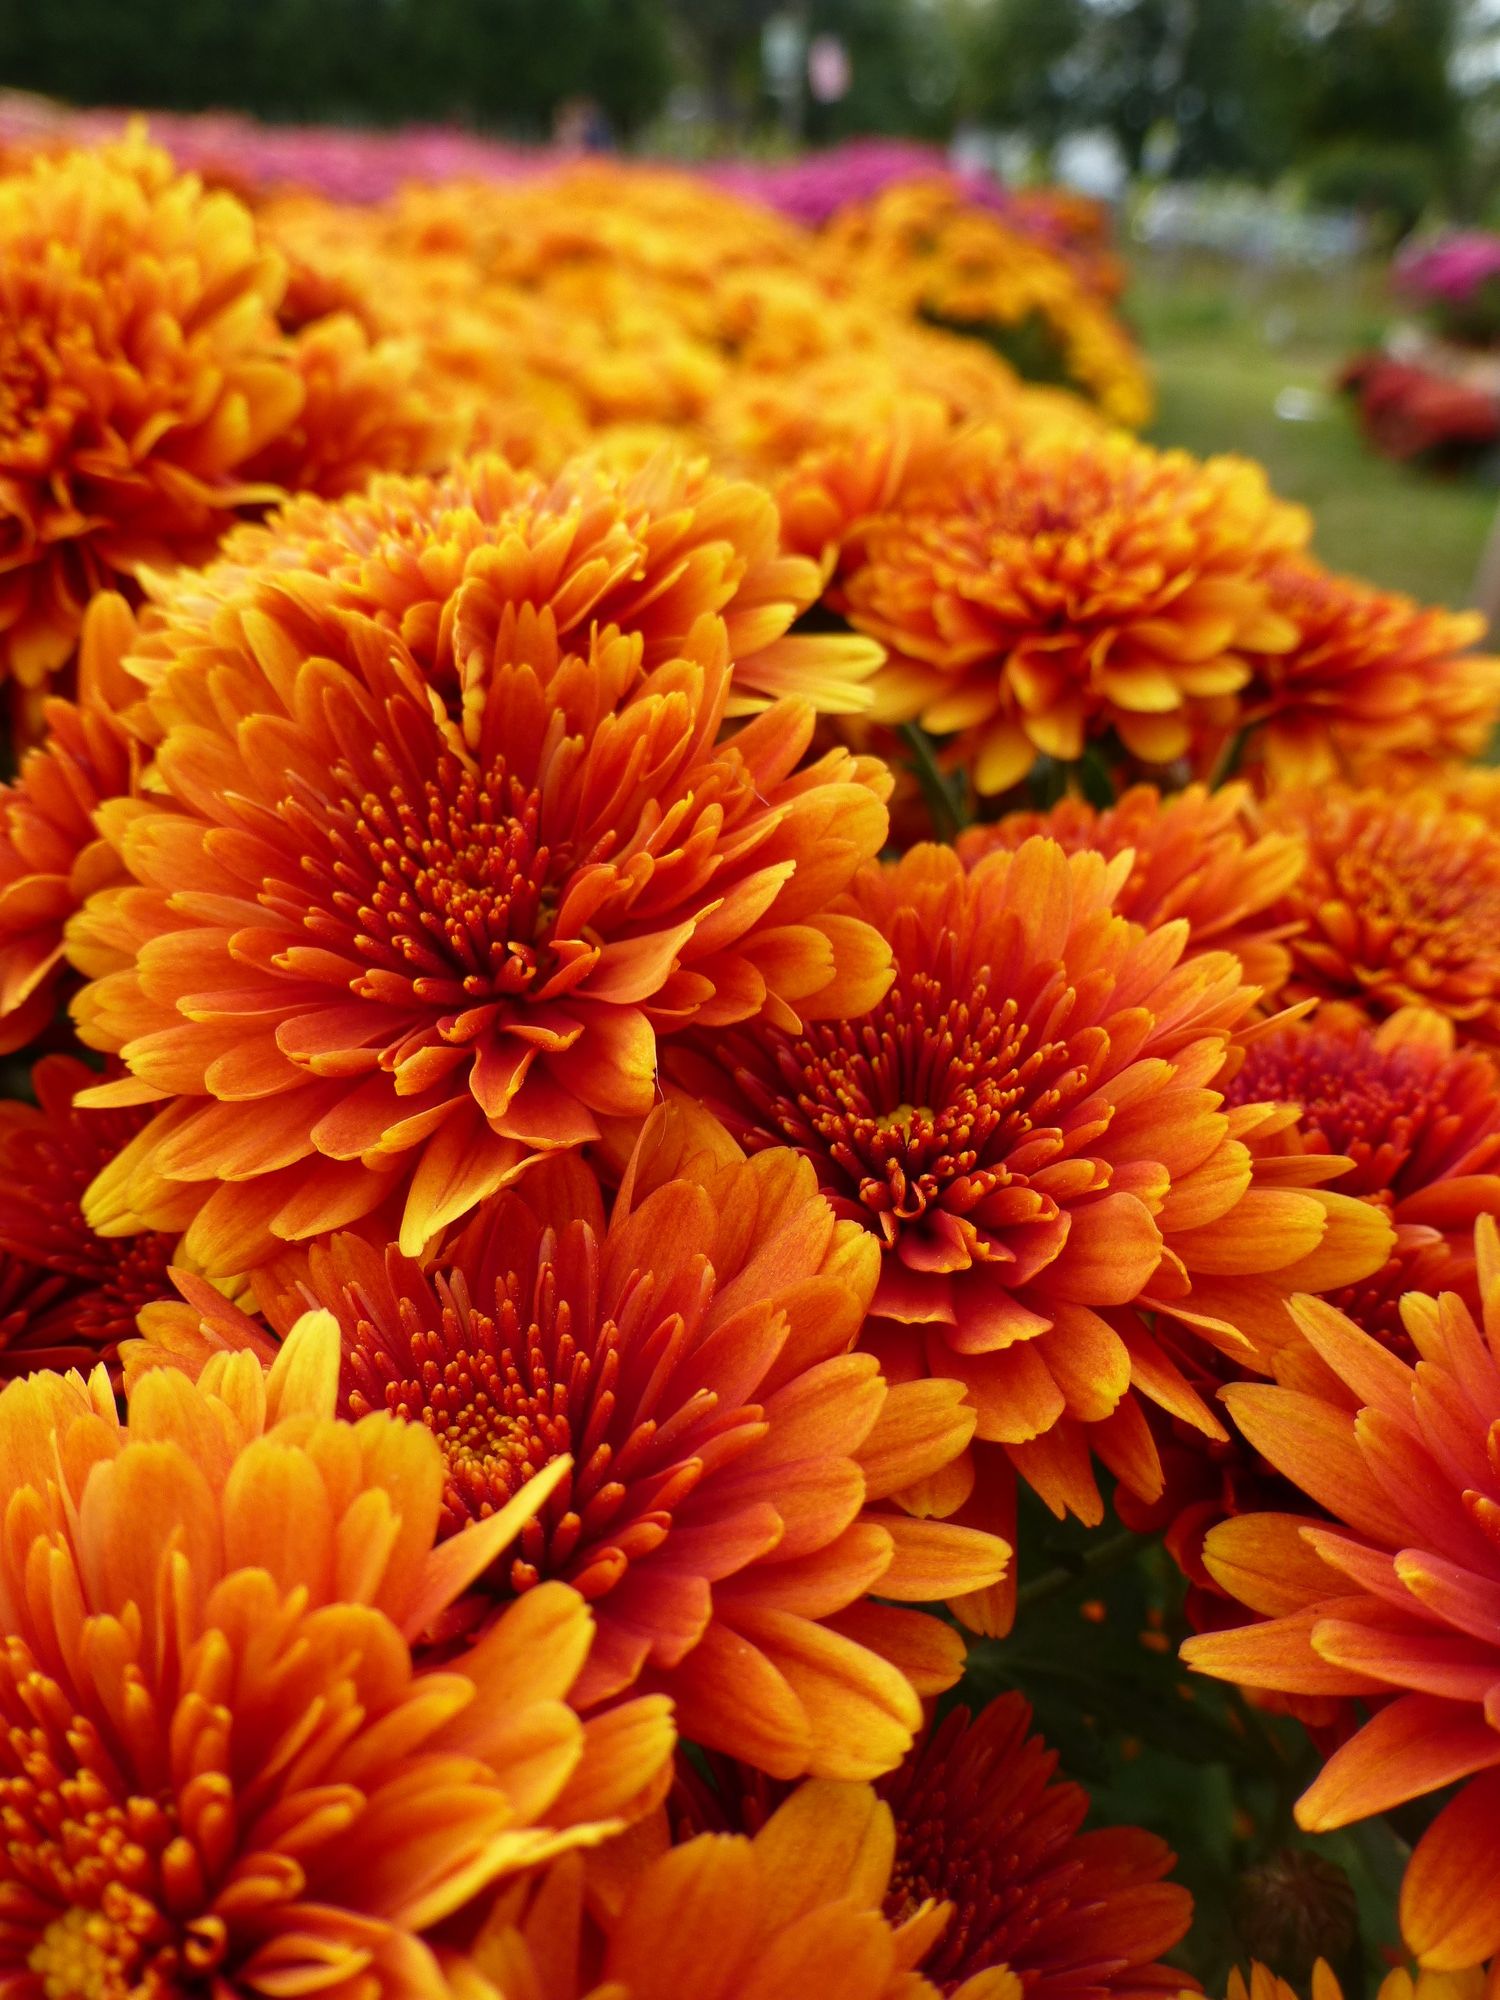 Mums are in full bloom this season at Crossroads.